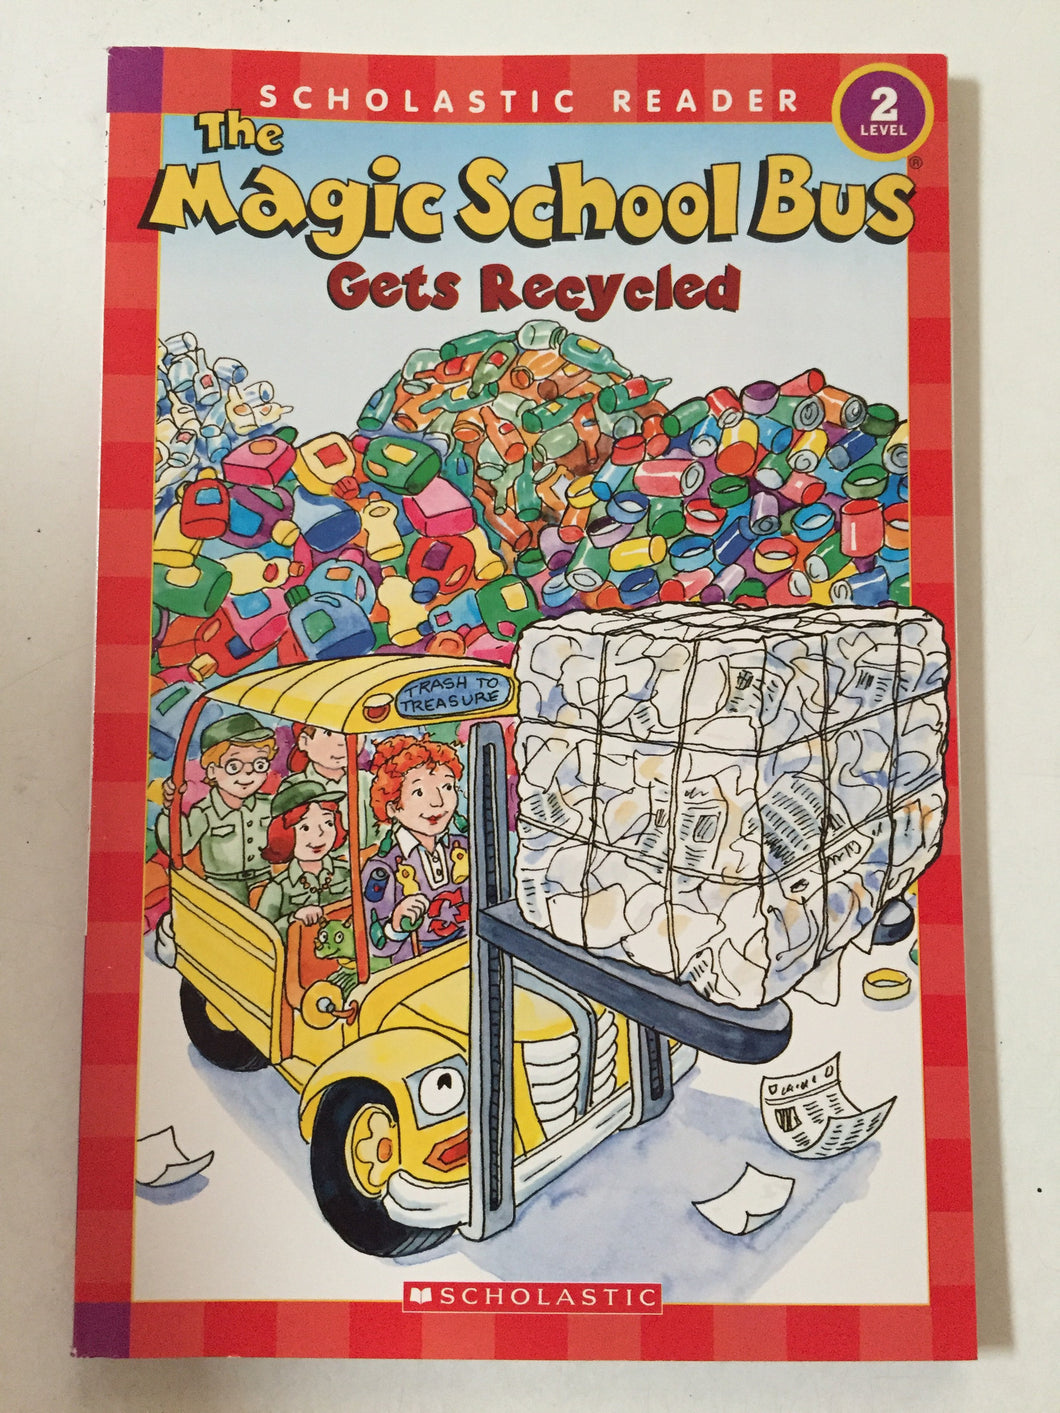 The Magic School Bus Gets Recycled - Slickcatbooks